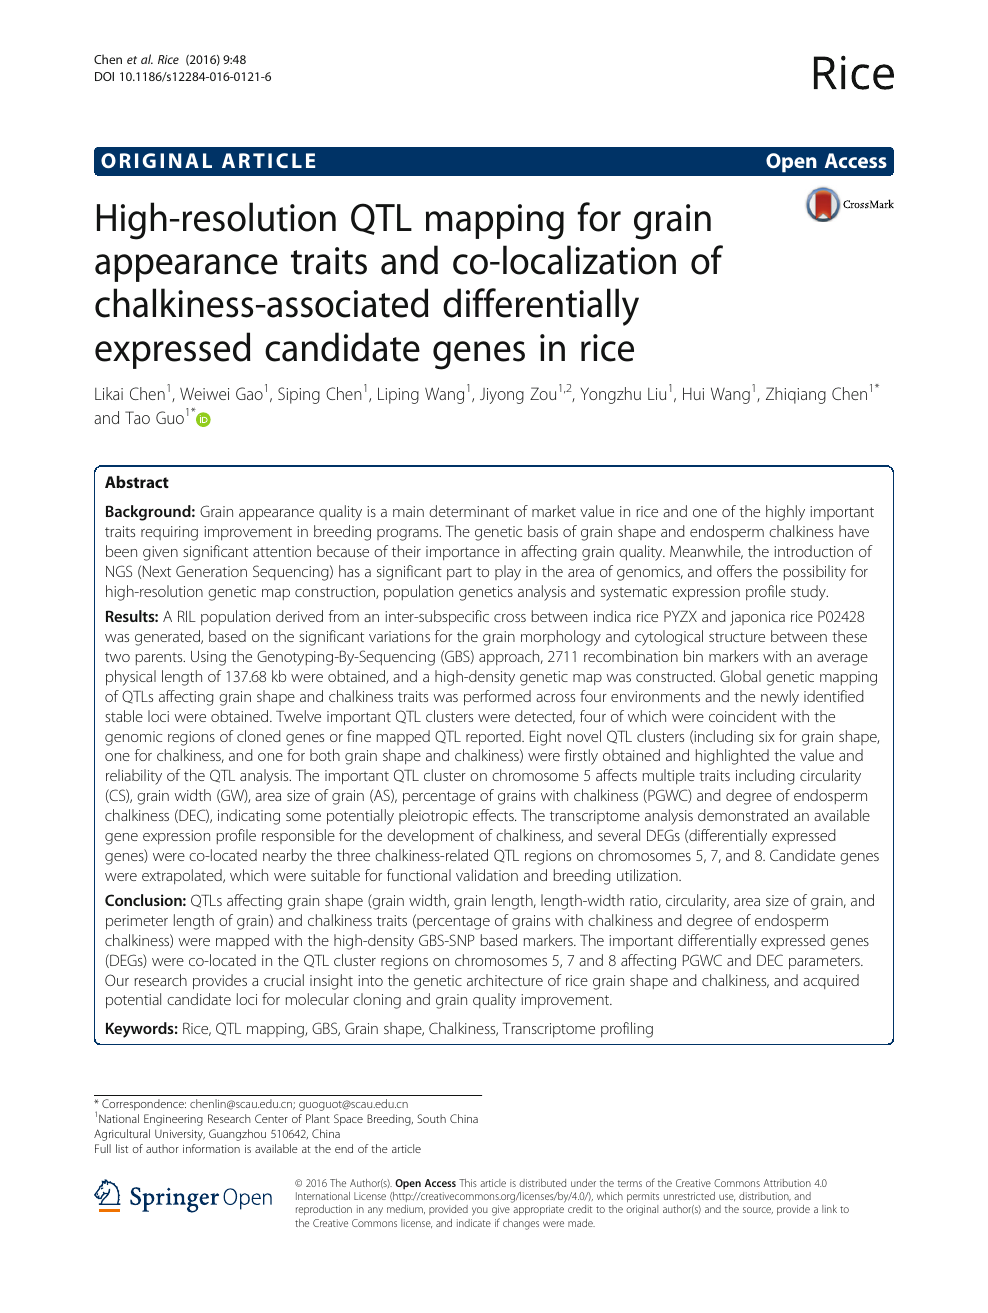 High Resolution Qtl Mapping For Grain Appearance Traits And Co Localization Of Chalkiness Associated Differentially Expressed Candidate Genes In Rice Topic Of Research Paper In Biological Sciences Download Scholarly Article Pdf And Read For - roblox id mm2 shape of you remix